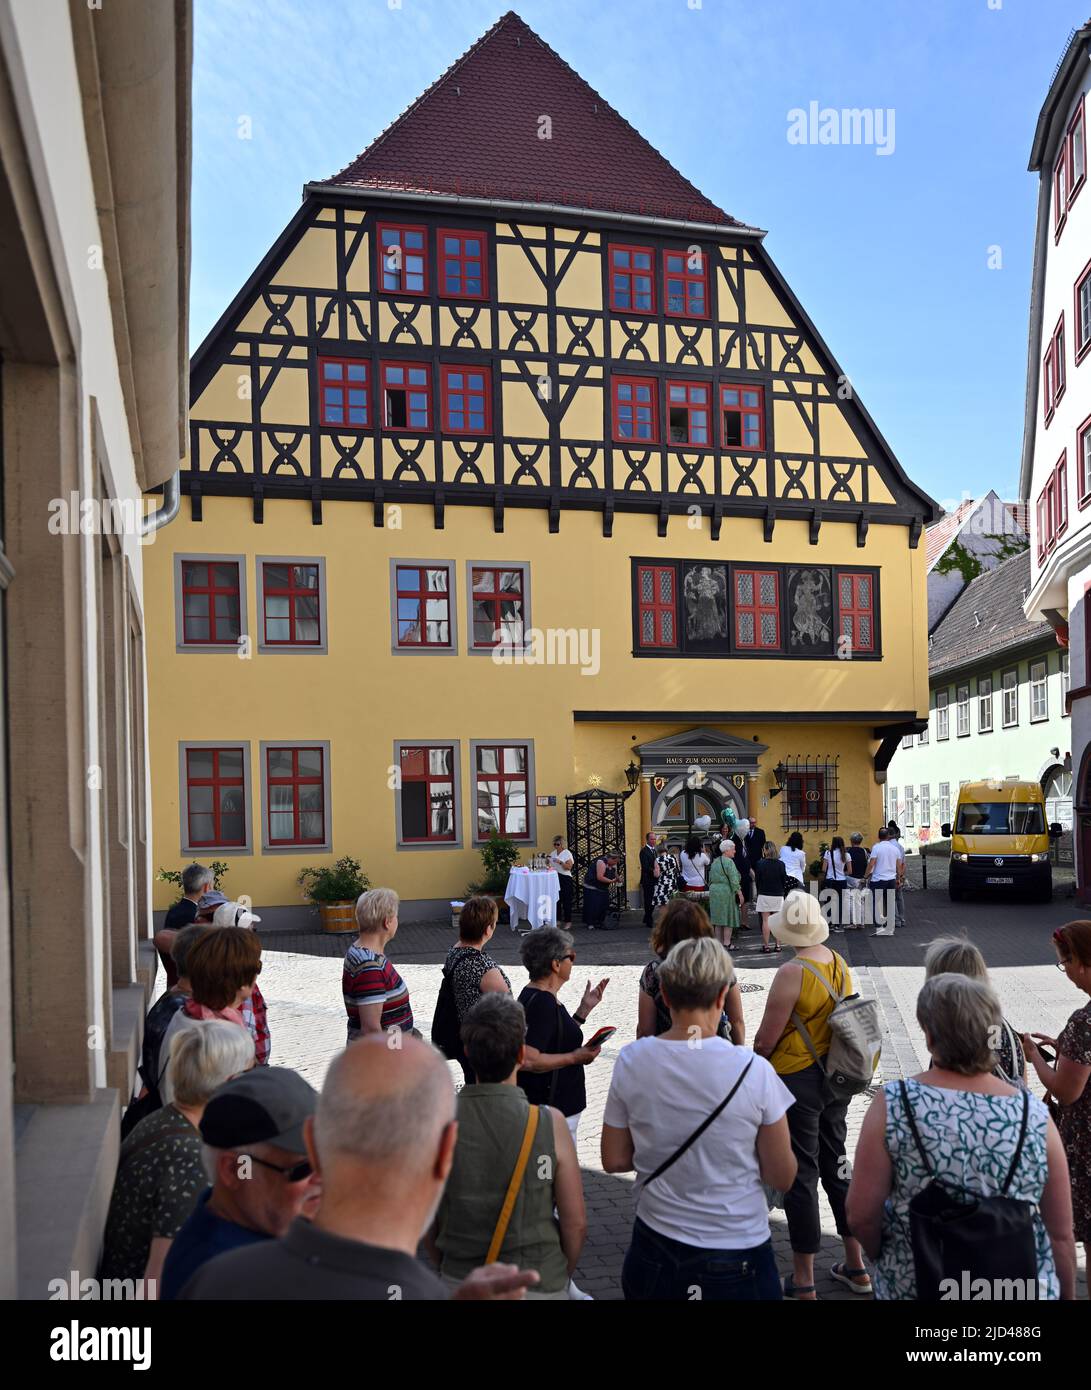 Erfurt, Germany. 17th June, 2022. The "Haus zum Sonneborn" from the 16th century is the wedding house and registry office of Erfurt. Many registry offices in Thuringia offer unusual locations for weddings. However, the clear majority of couples opt for a civil wedding ceremony on the premises of the registry office, according to a survey conducted by the German Press Agency. Credit: Martin Schutt/dpa/Alamy Live News Stock Photo